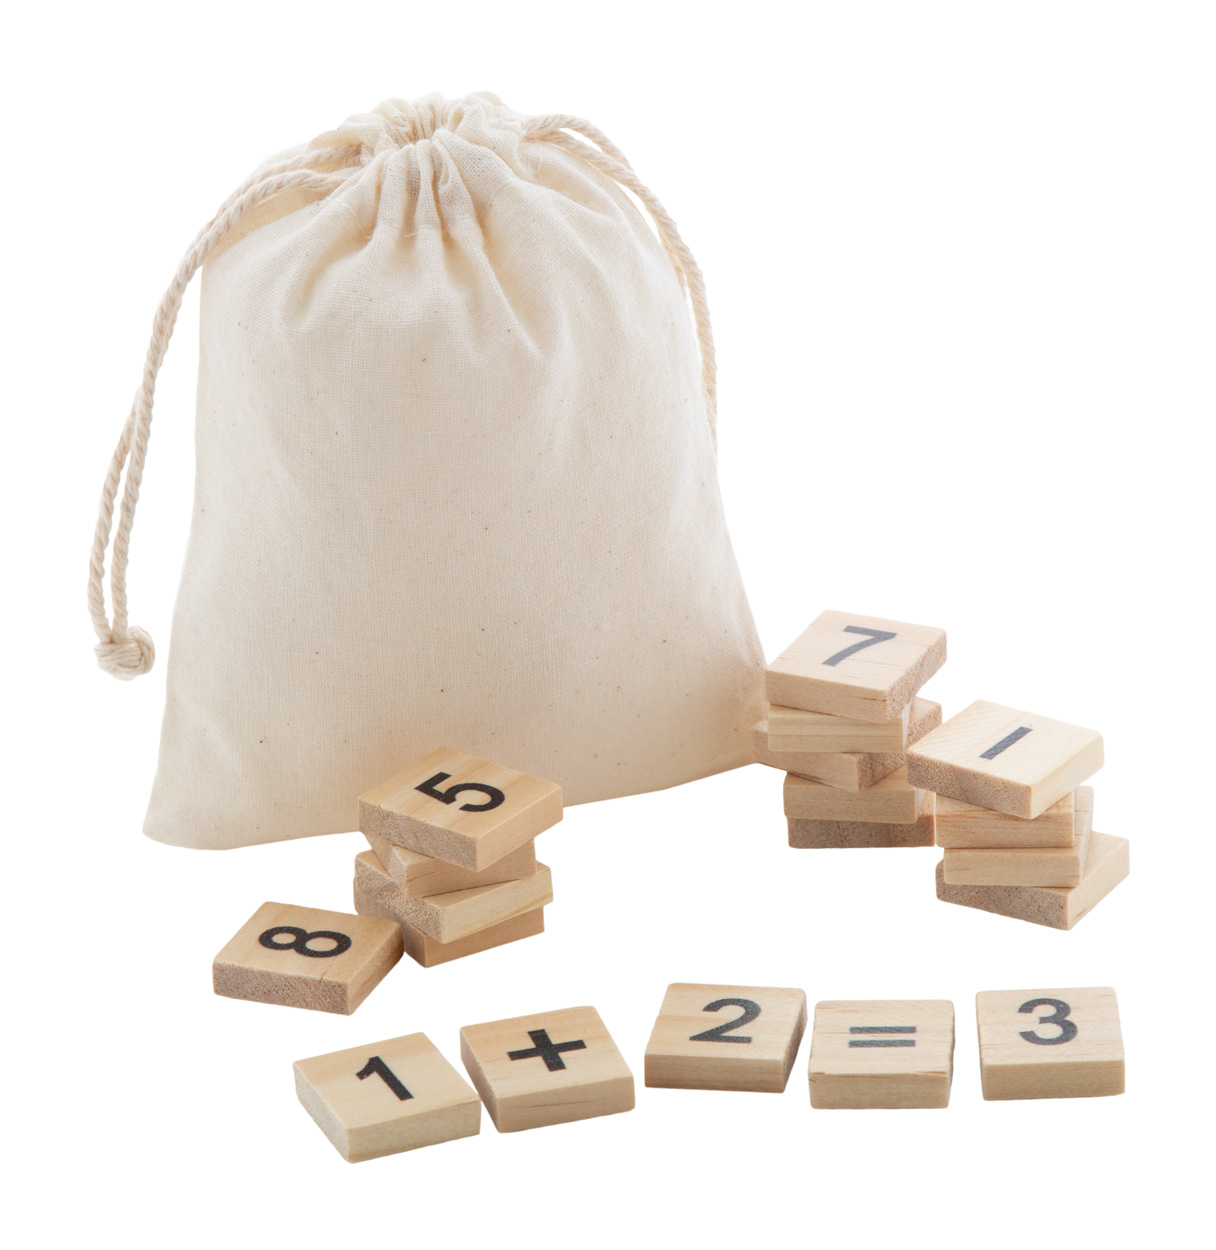 Galois counting game - beige